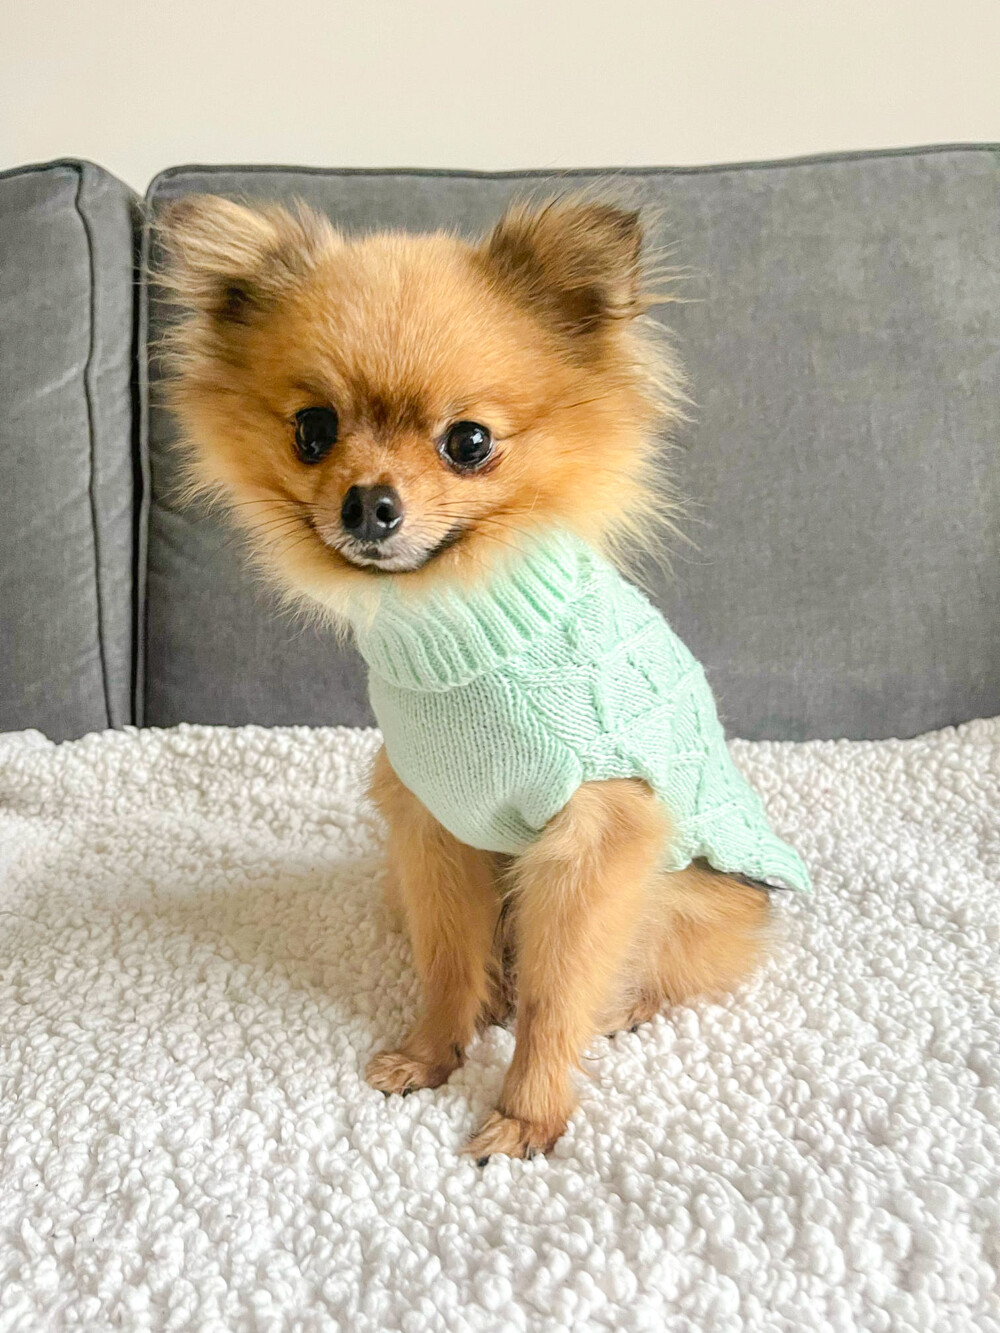 a small, fluffy pomeranian sitting on a white fleece blanket, wearing a mint green cable knit dog jumper.